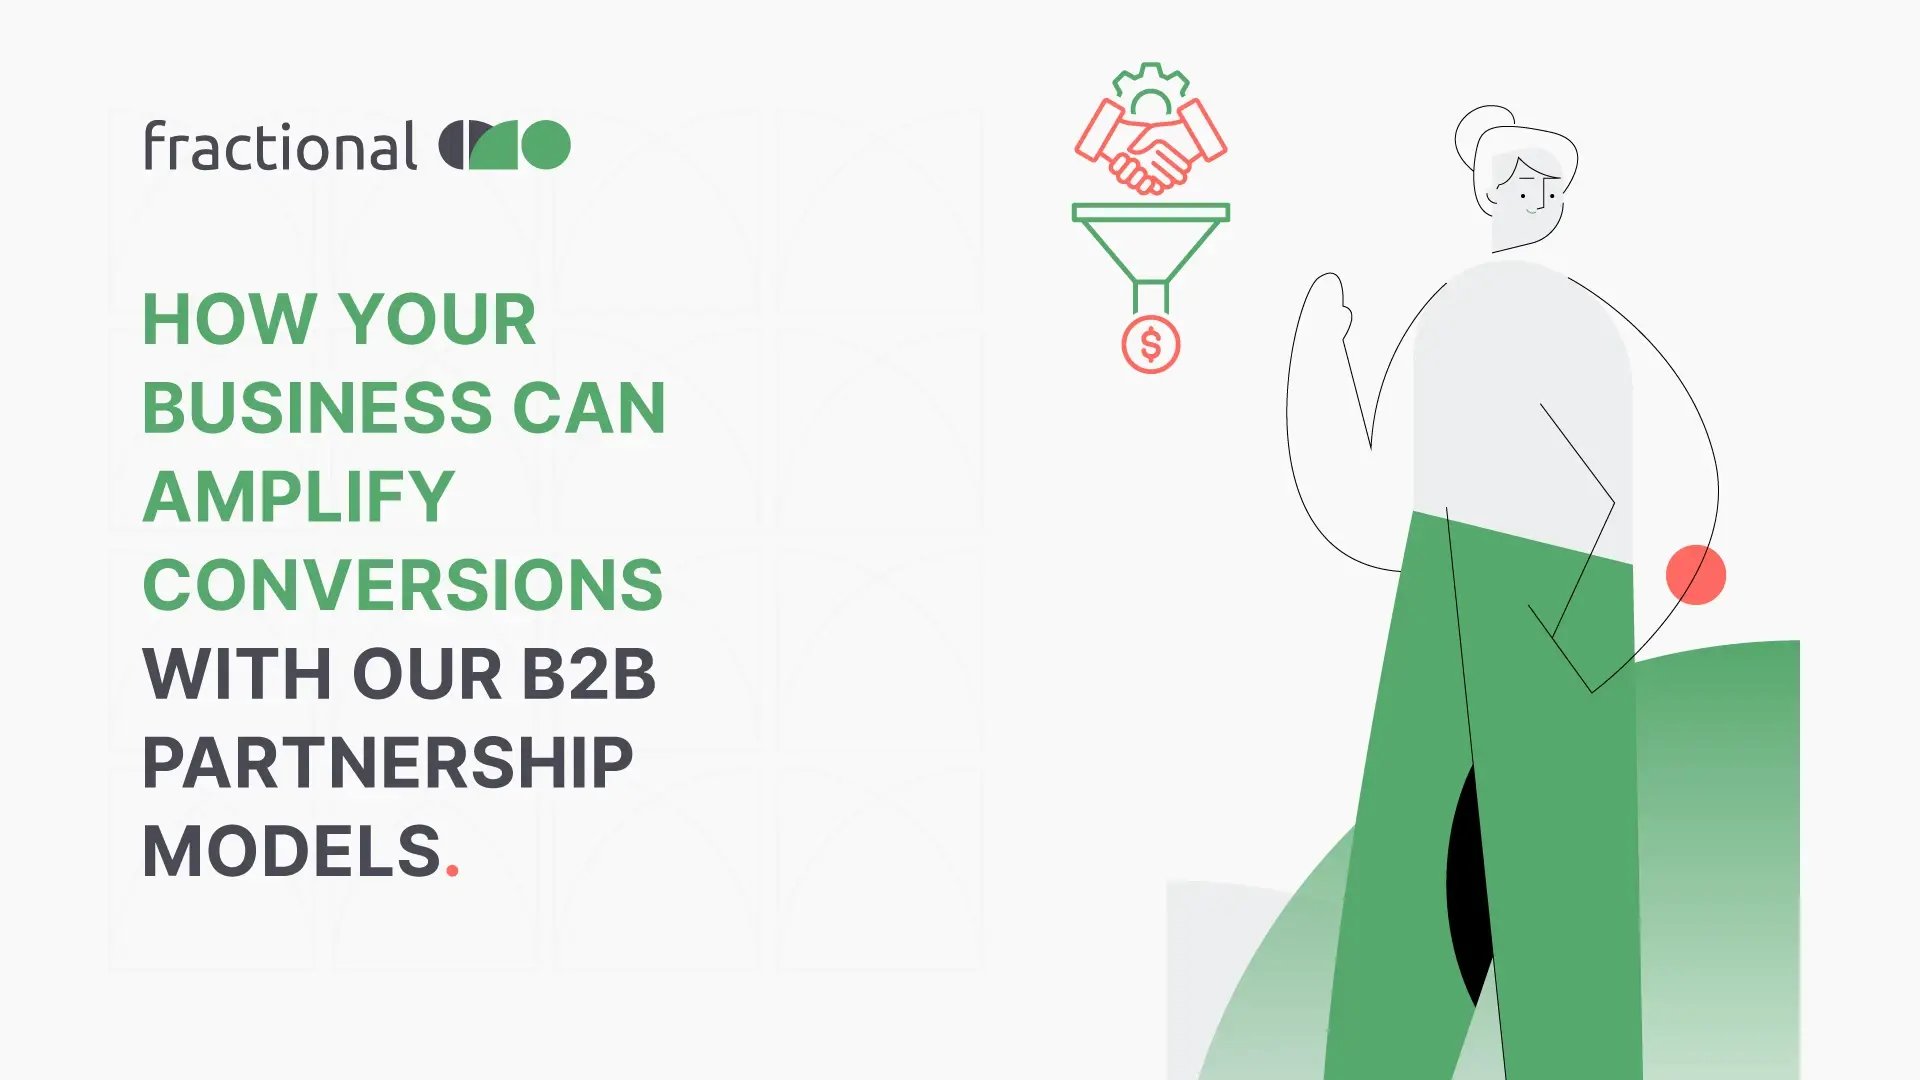 How your business can amplify conversions with our B2B partnership models.